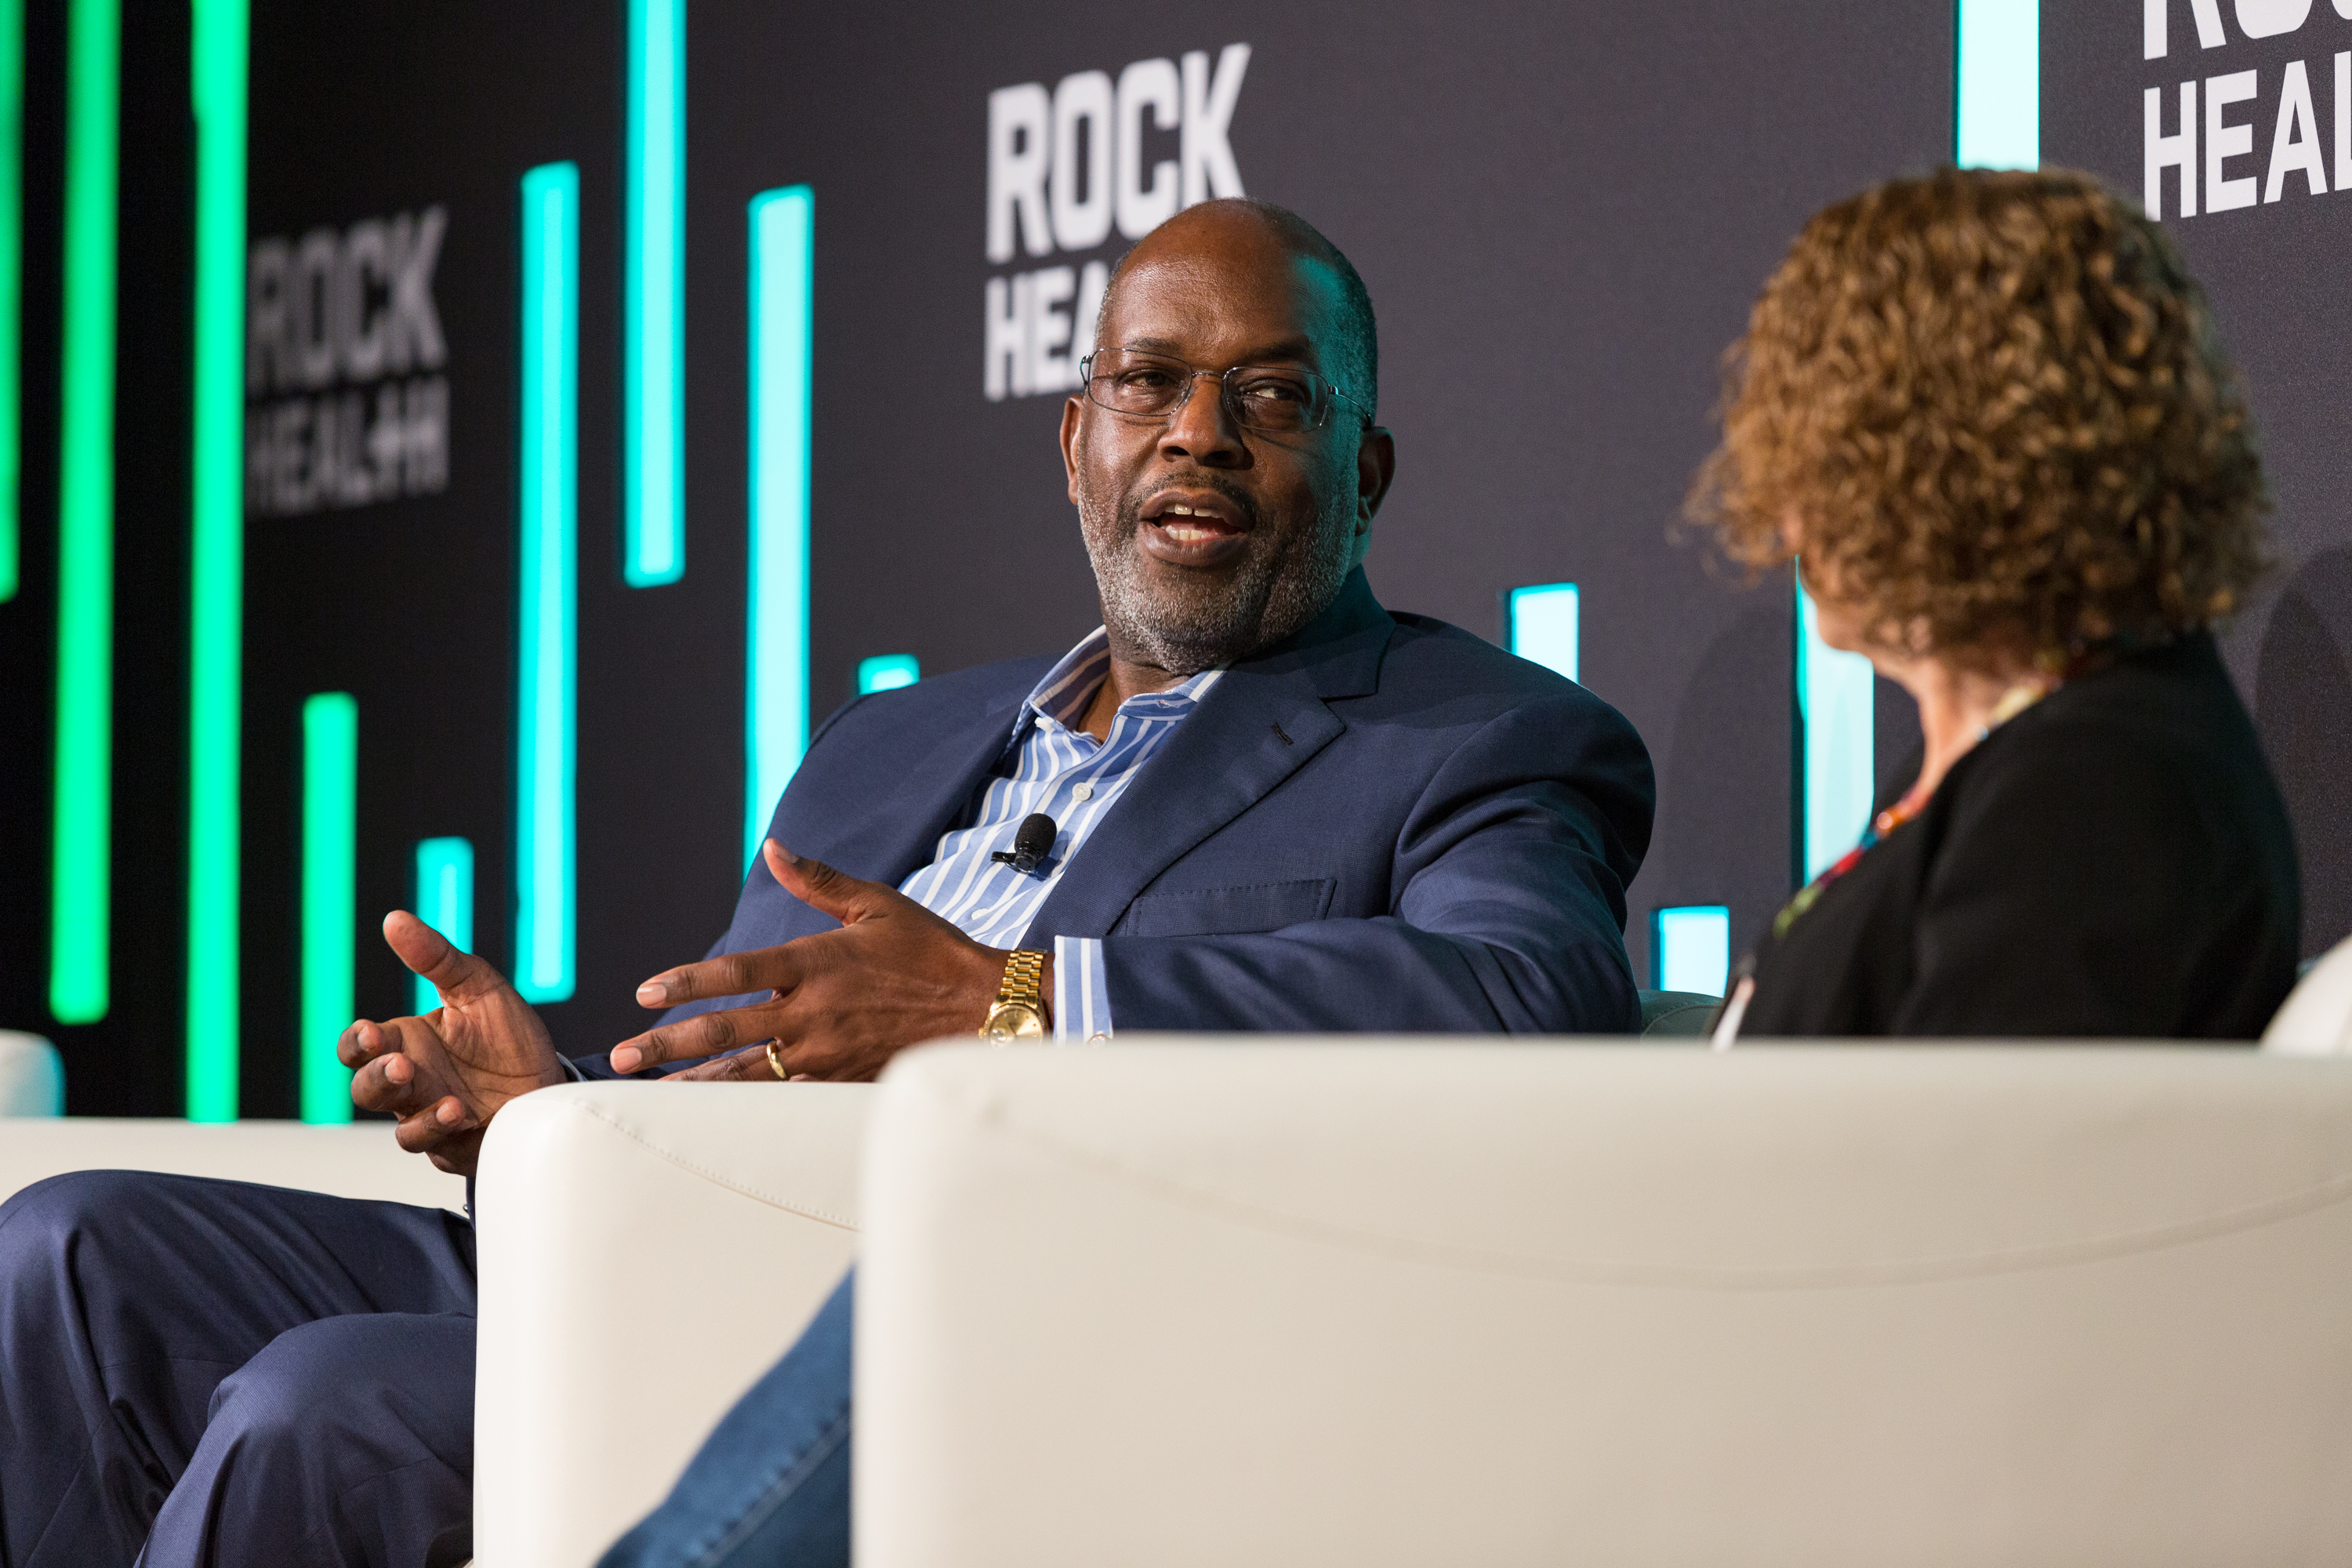 7 reasons why you should attend Rock Health Summit 2019